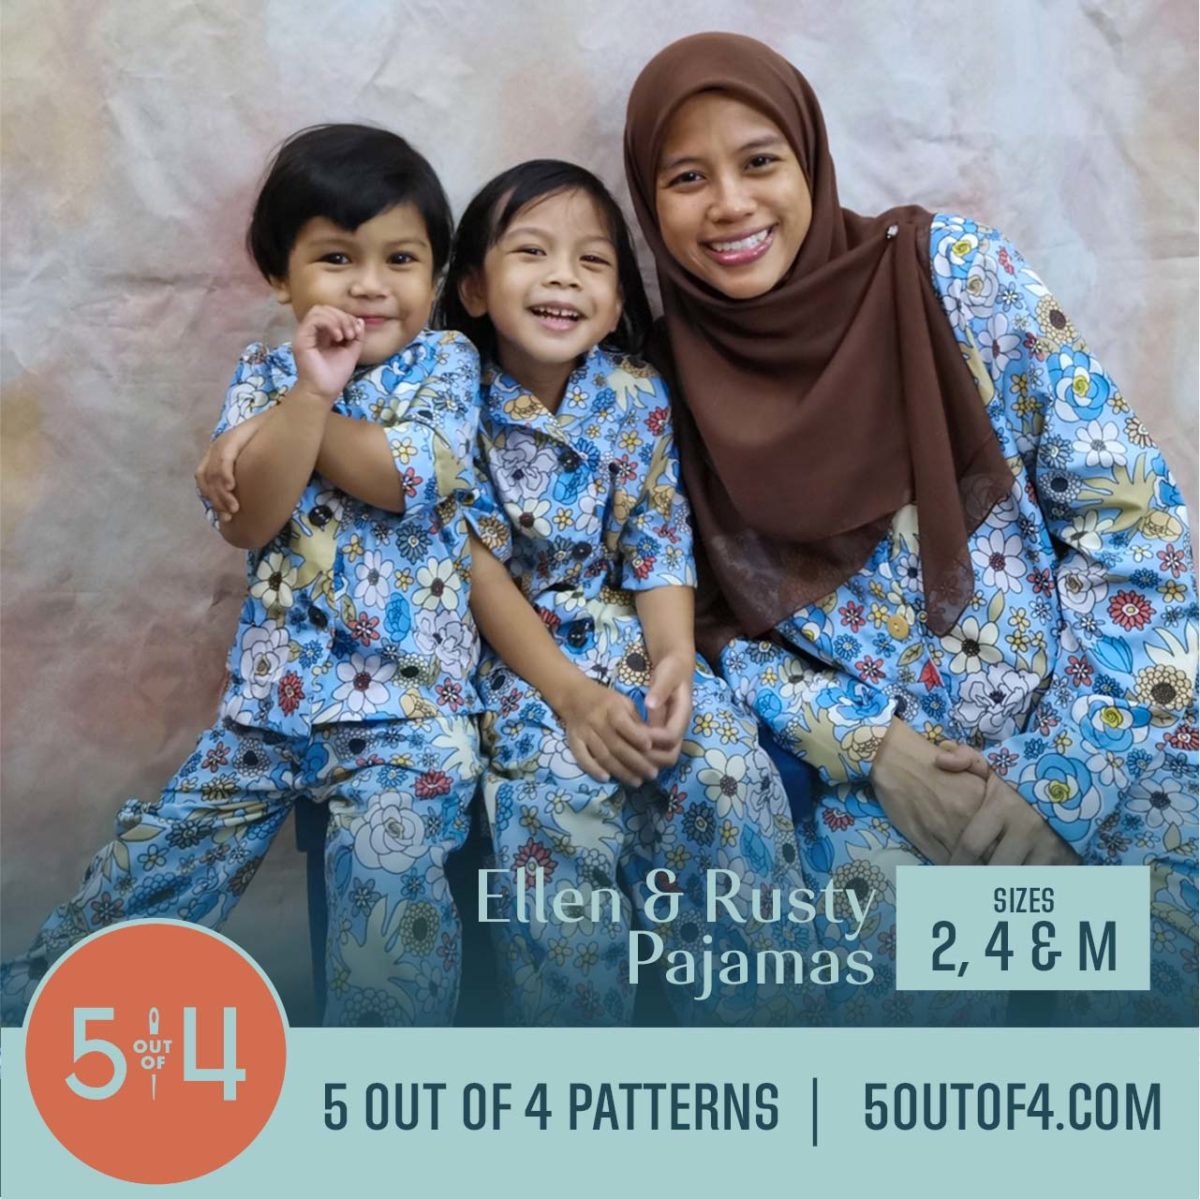 5oo4 Woven Pajama Pattern for Women and Kids